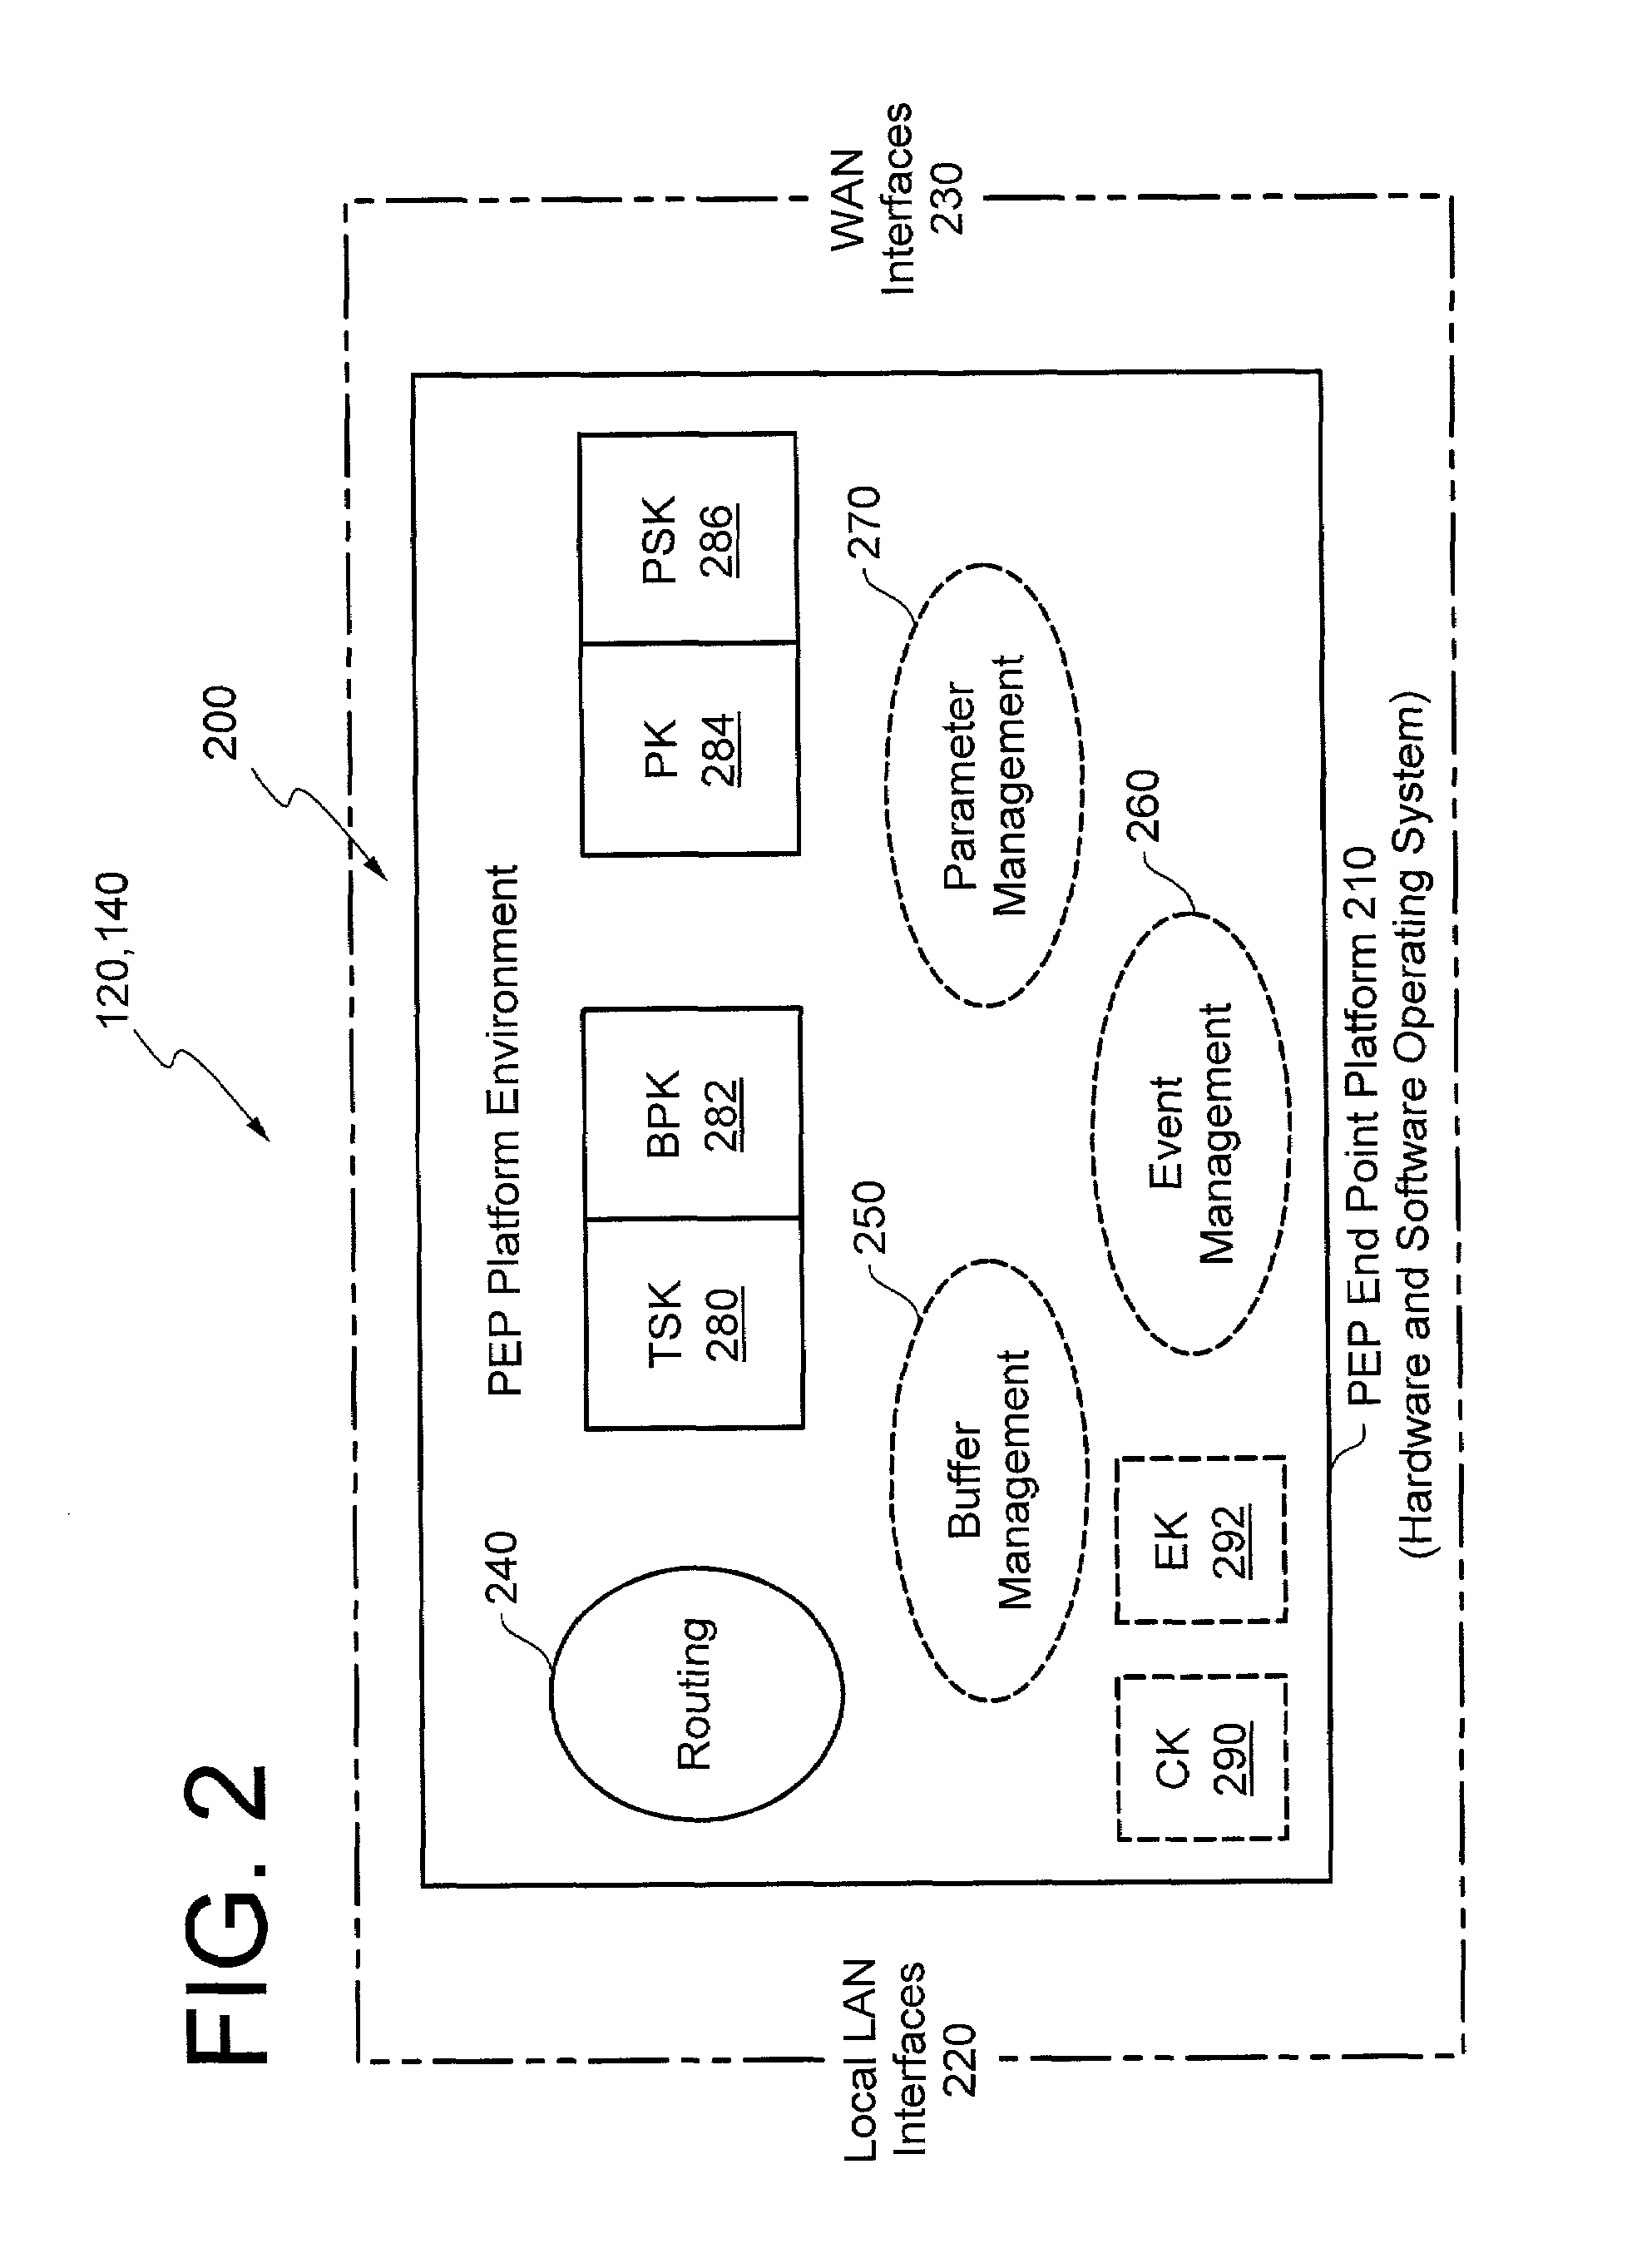 Method and system for using a backbone protocol to improve network performance